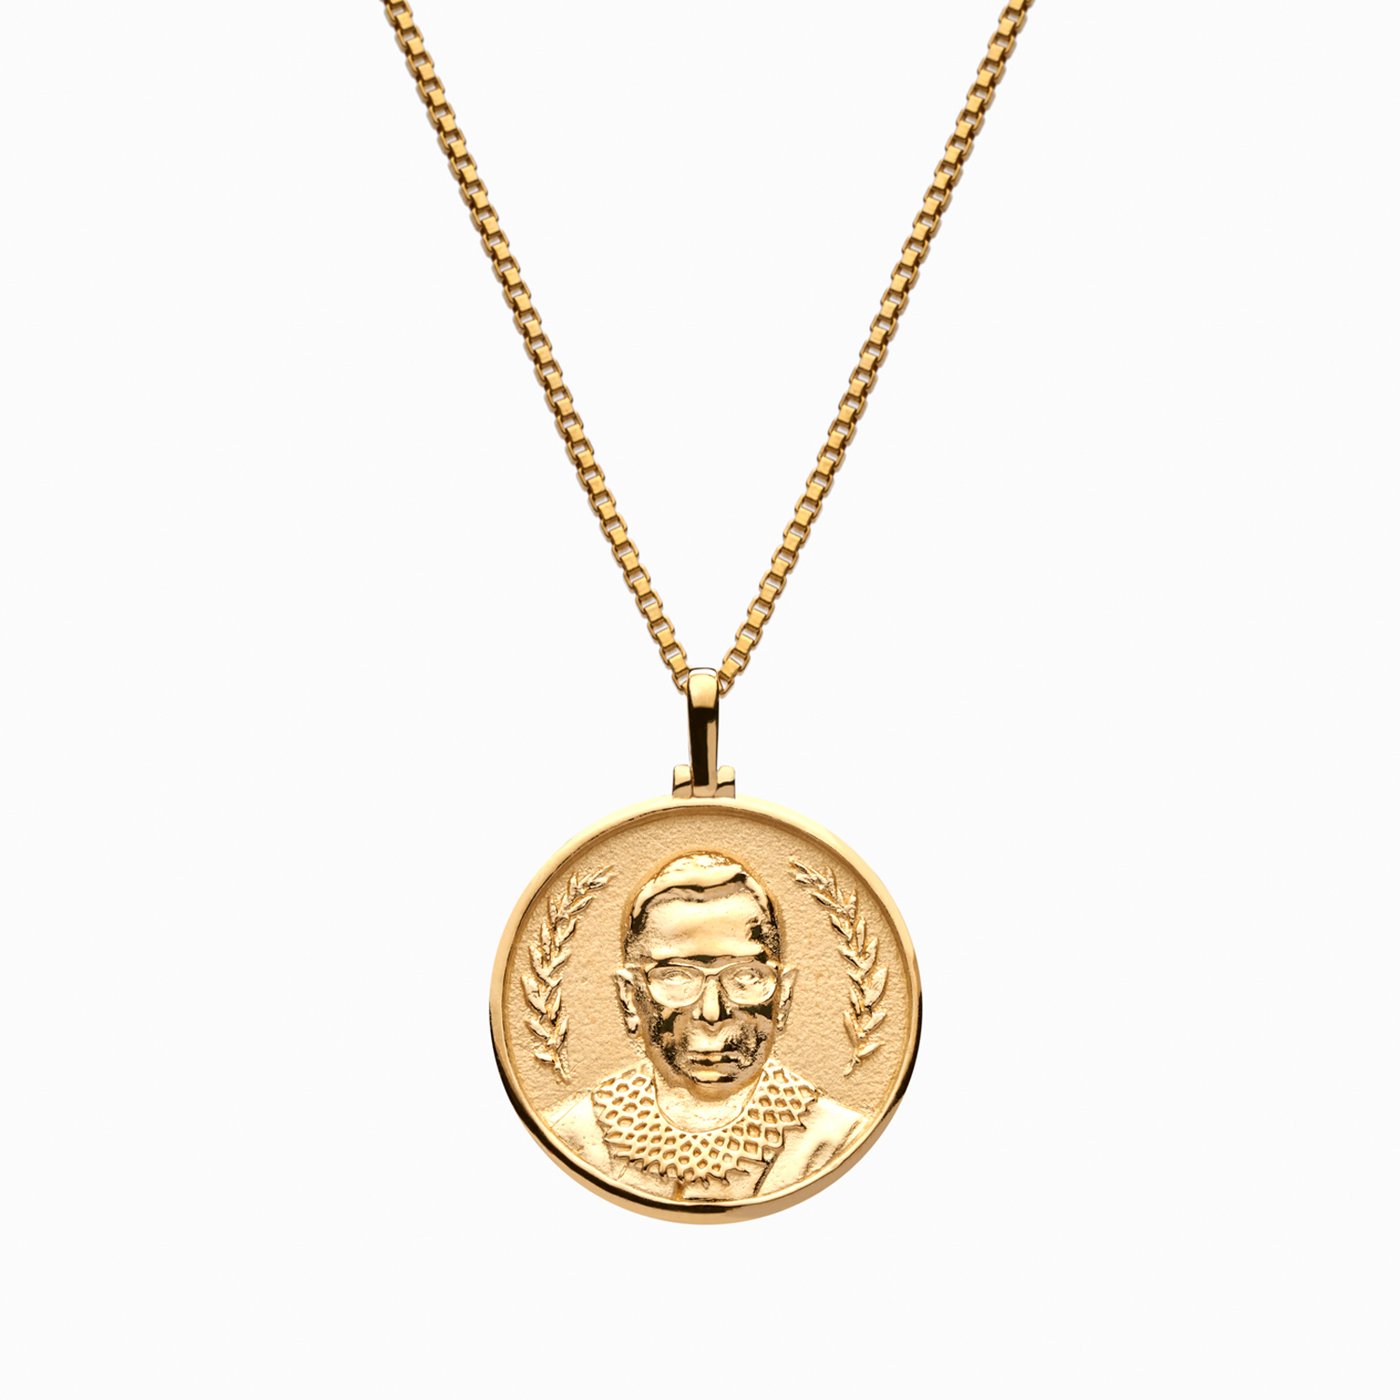 gold coin pendant necklace; RBG necklace